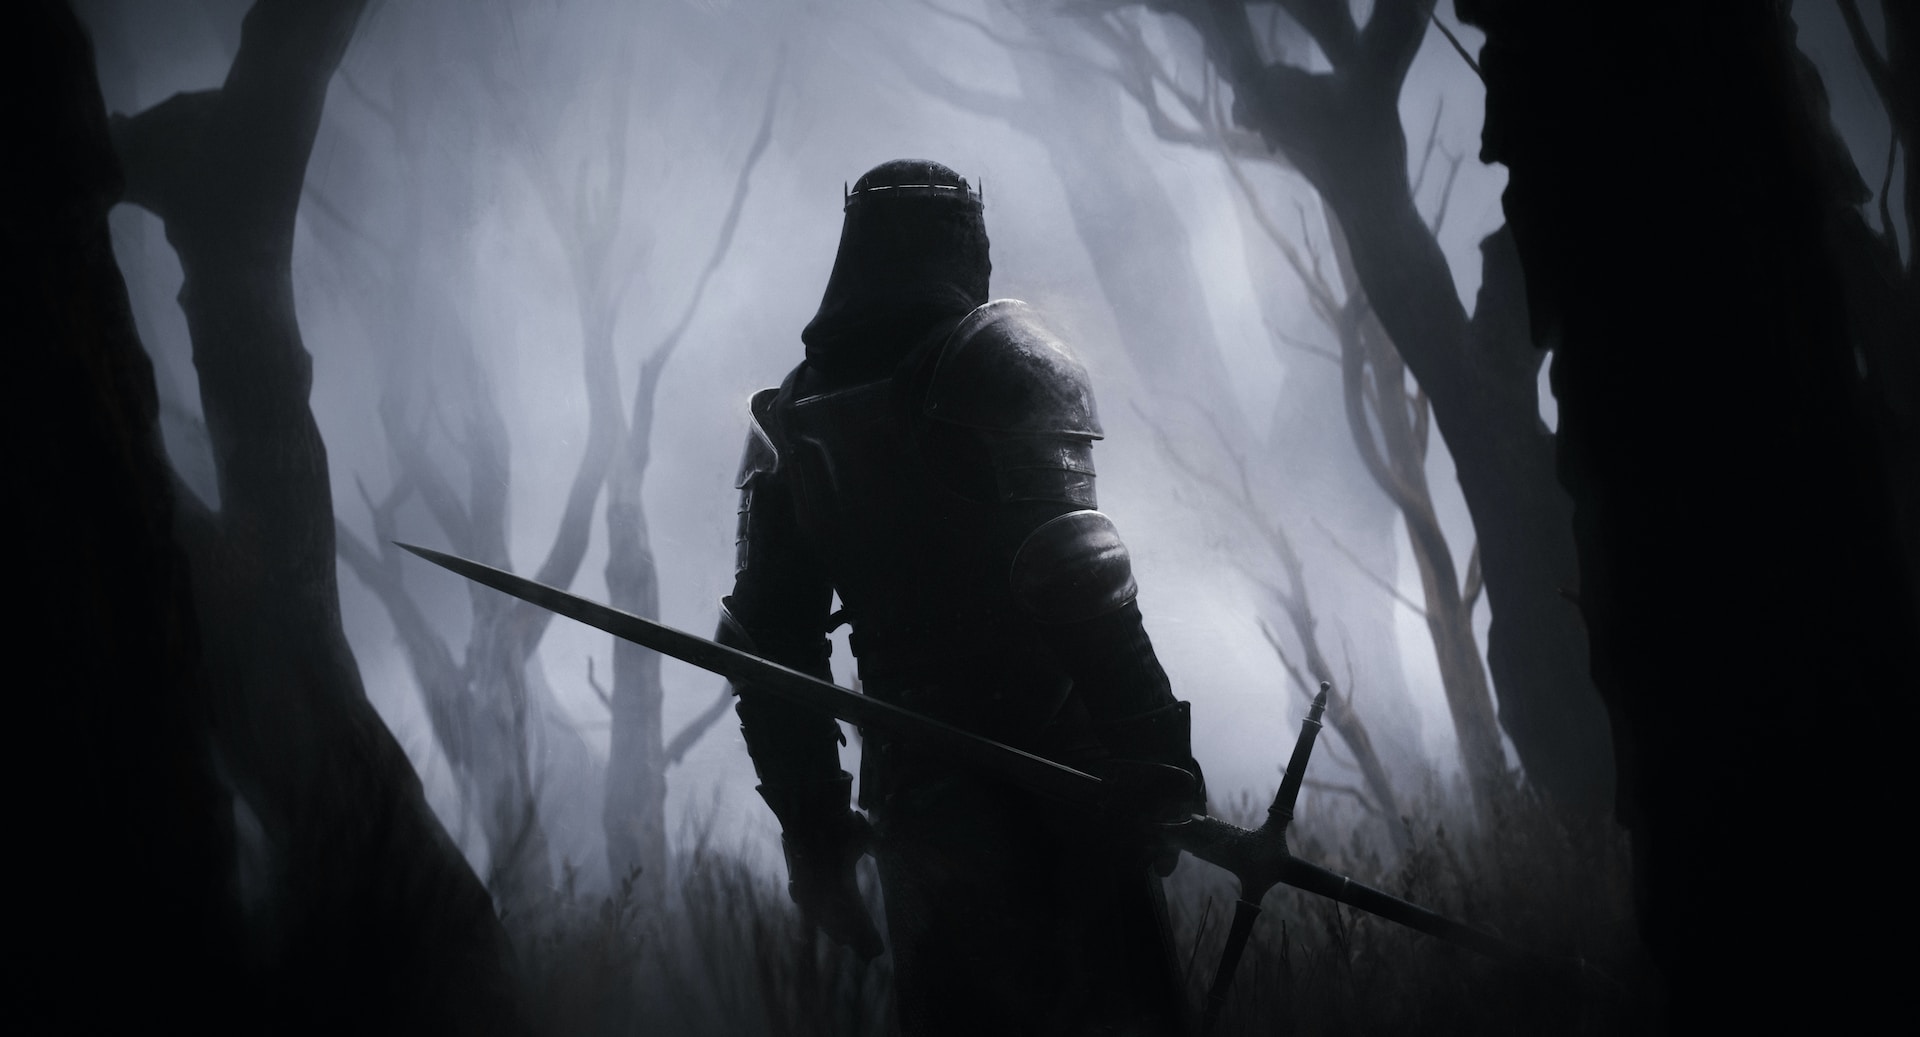 Image shows a knight walking through dark woods, visualizing the idea of literary agents traversing the oft-confusing world of publishing